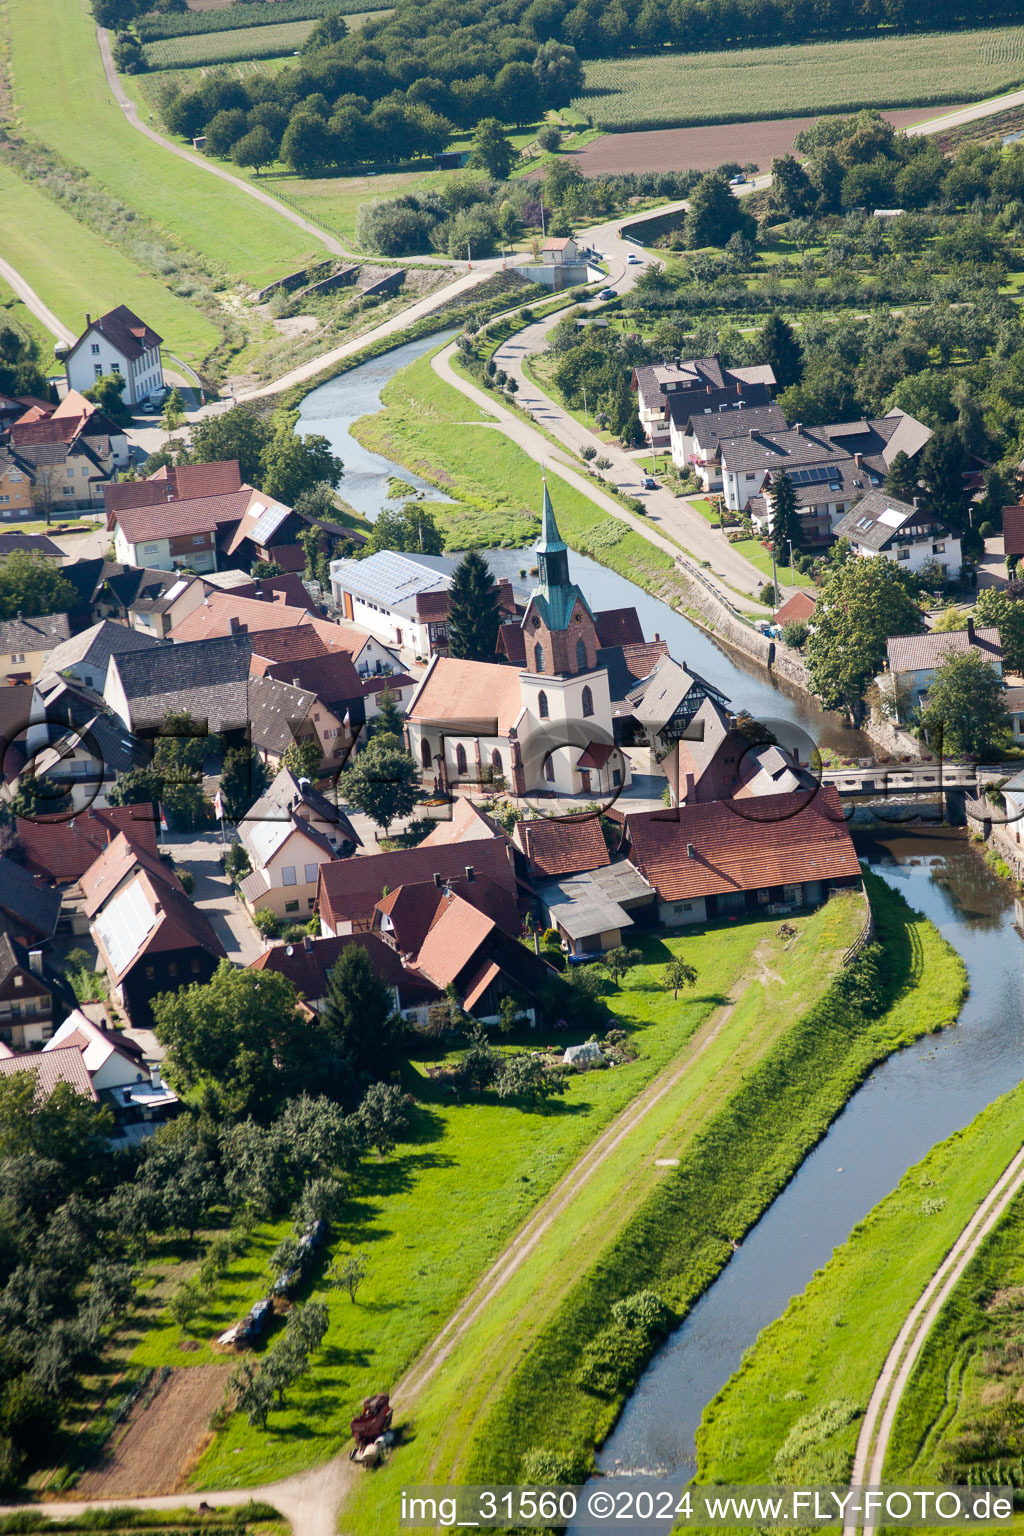 Oblique view of Village on the river bank areas of the river Rench in the district Erlach in Renchen in the state Baden-Wurttemberg